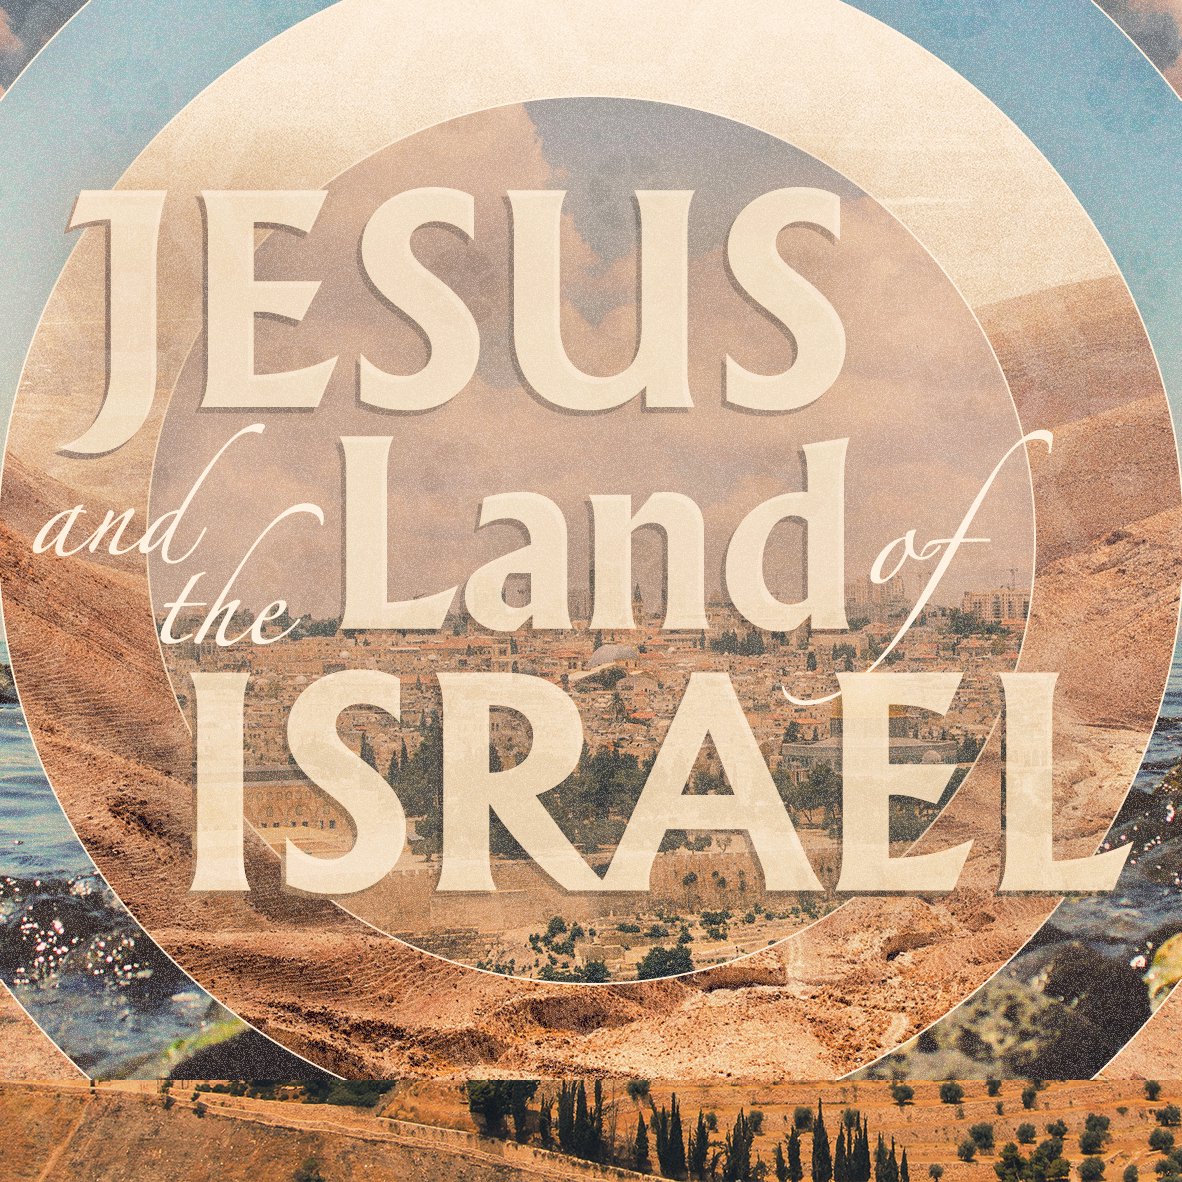 Jesus and the Gardens of Israel